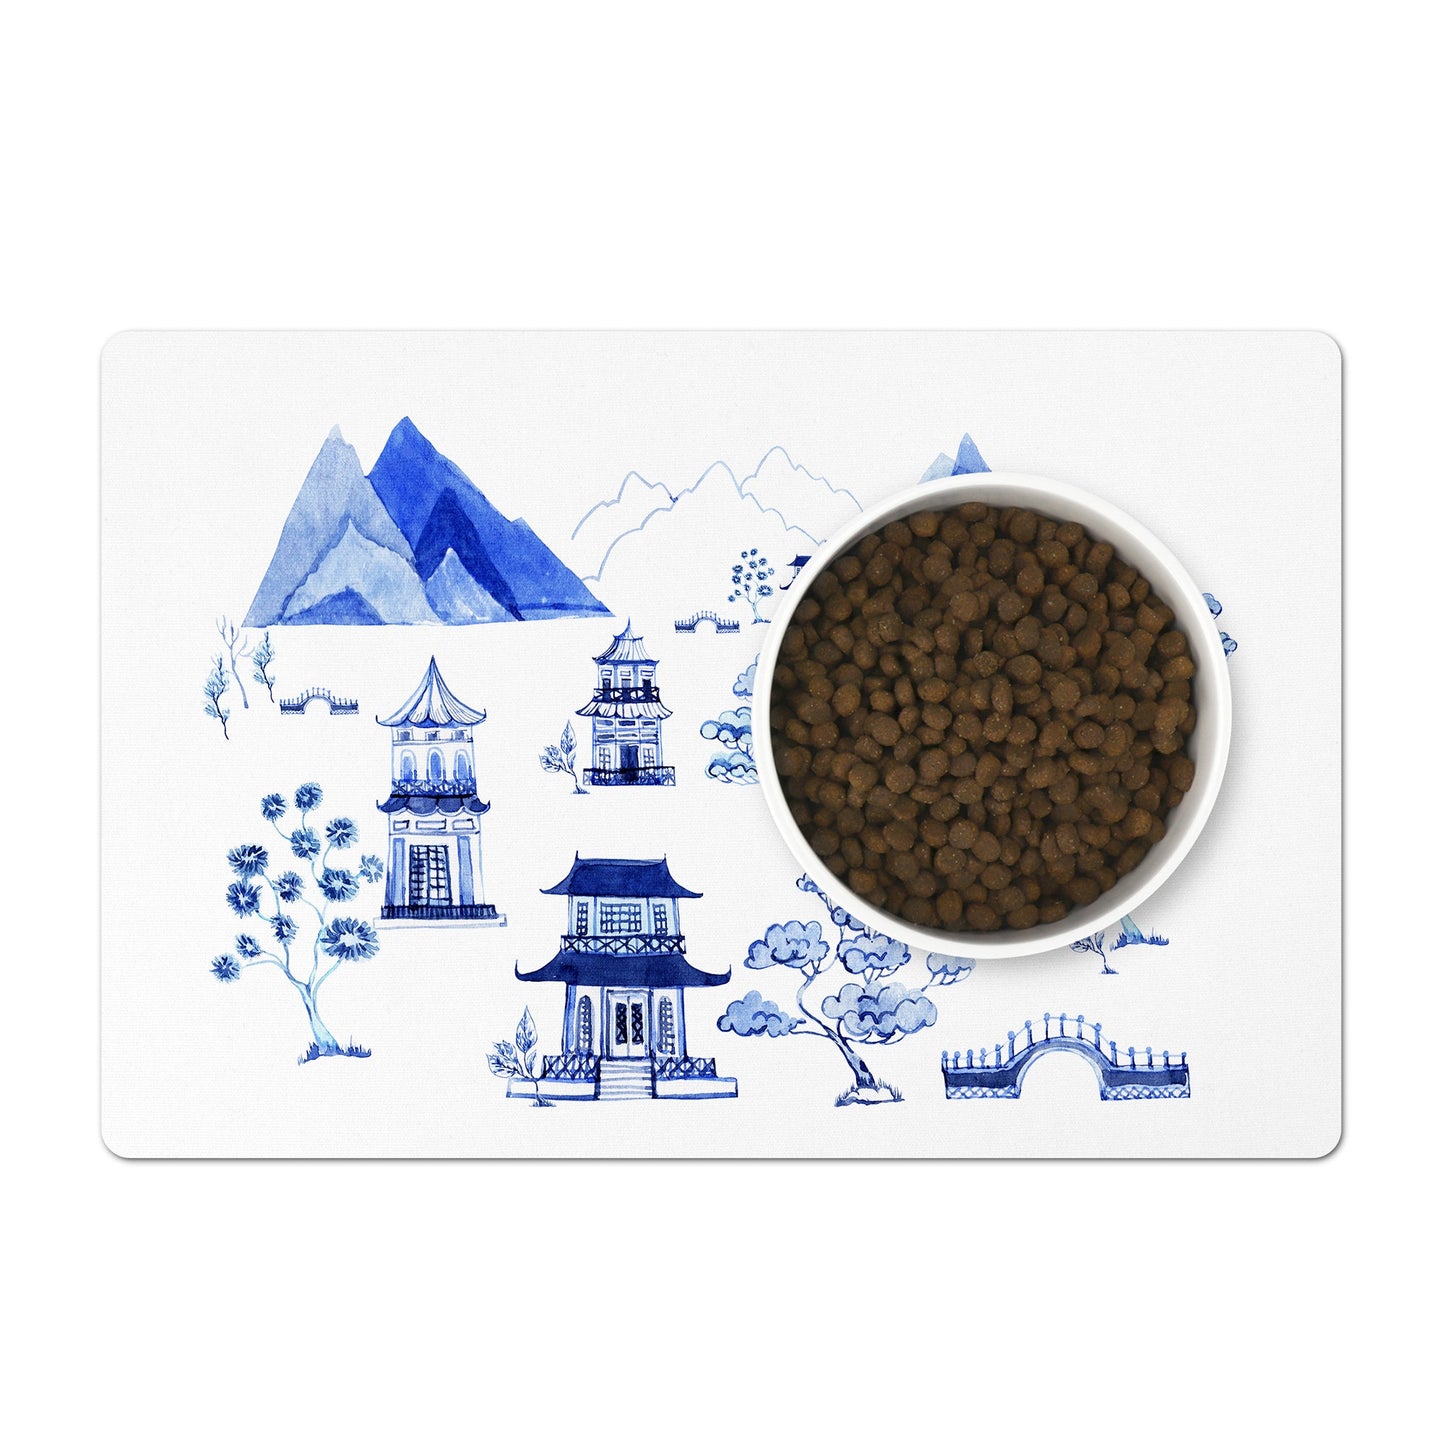 Designer pet food mat in blue and white with pagoda chinoiserie print.